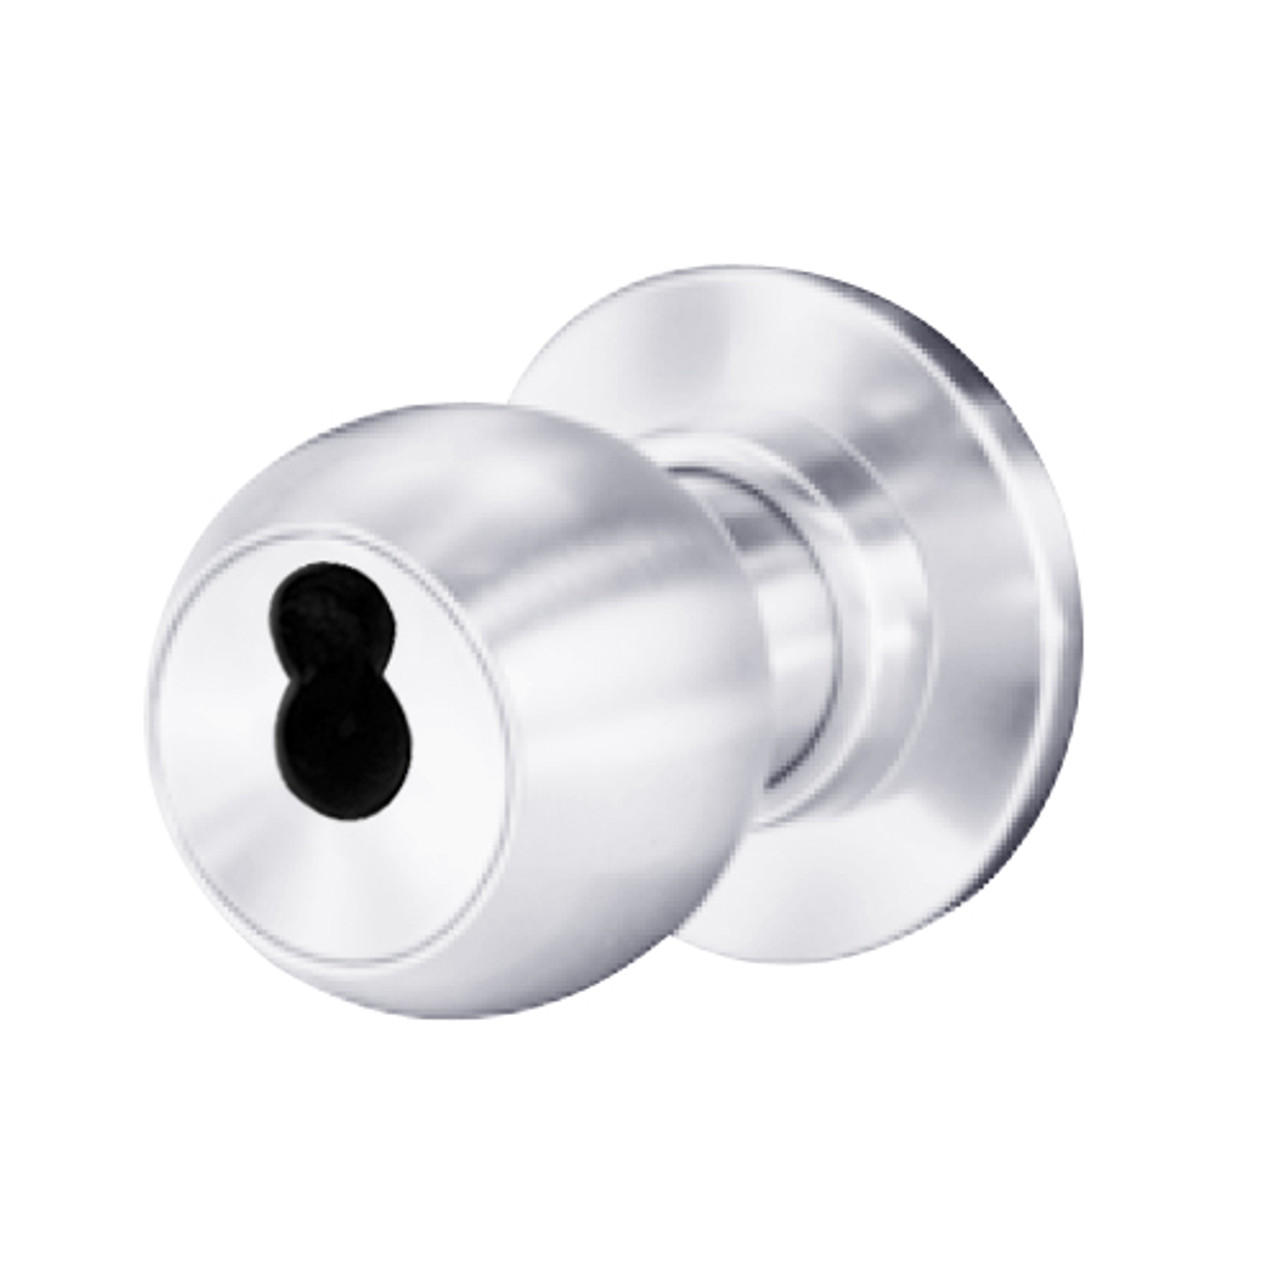 8K37XR4CSTK625 Best 8K Series Special Heavy Duty Cylindrical Knob Locks with Round Style in Bright Chrome